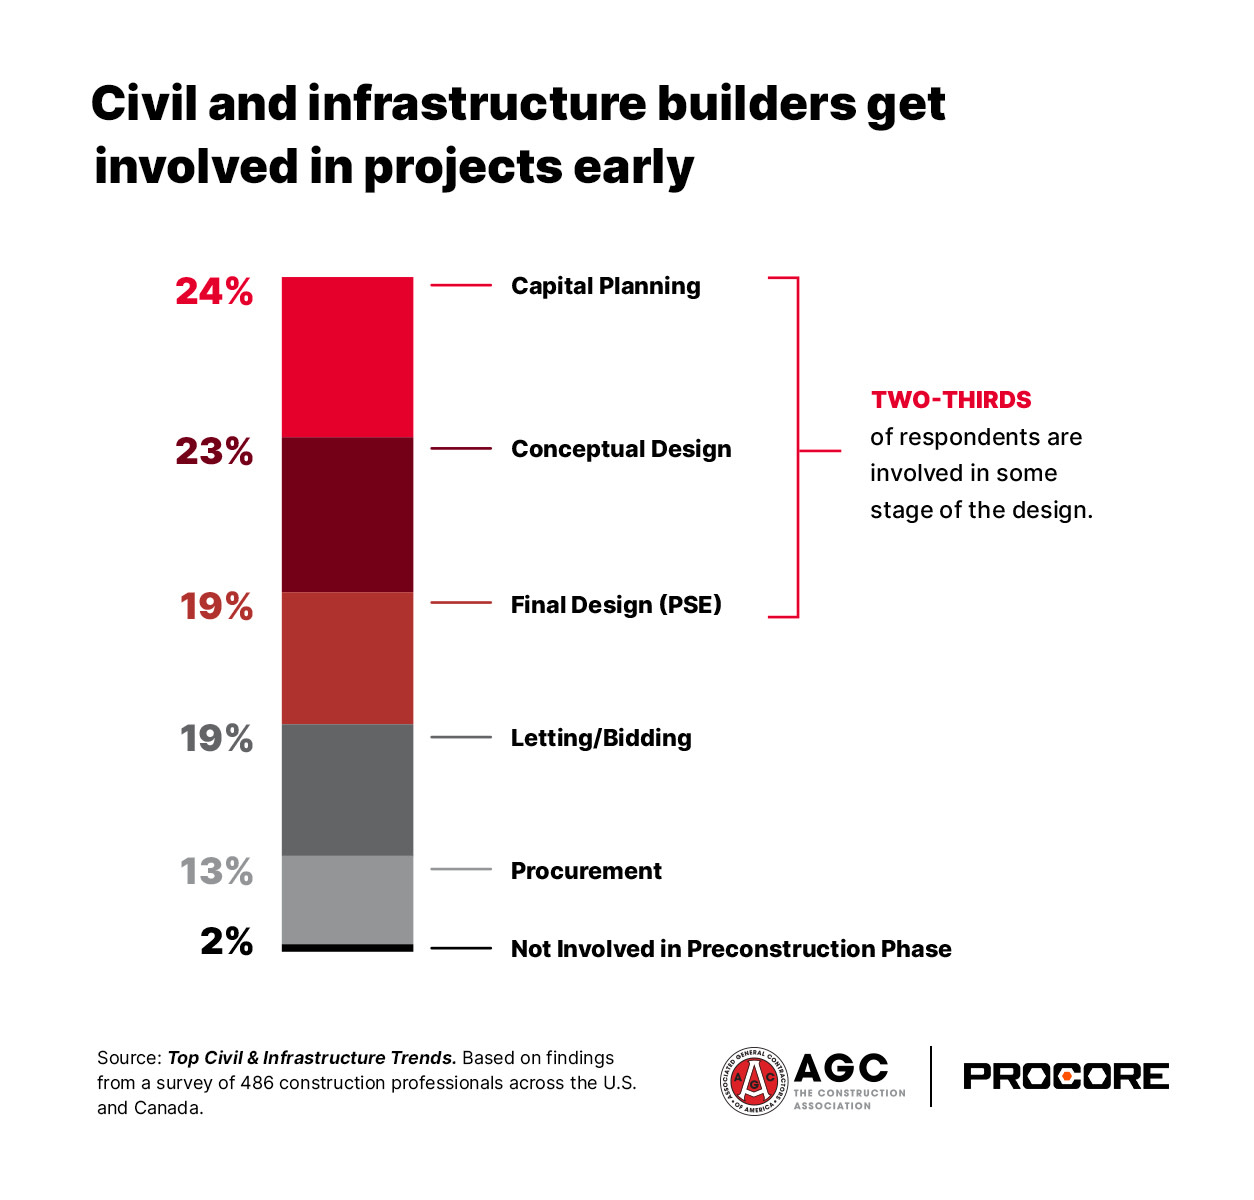 Civil and infrastructure builders get involved in projects early stats